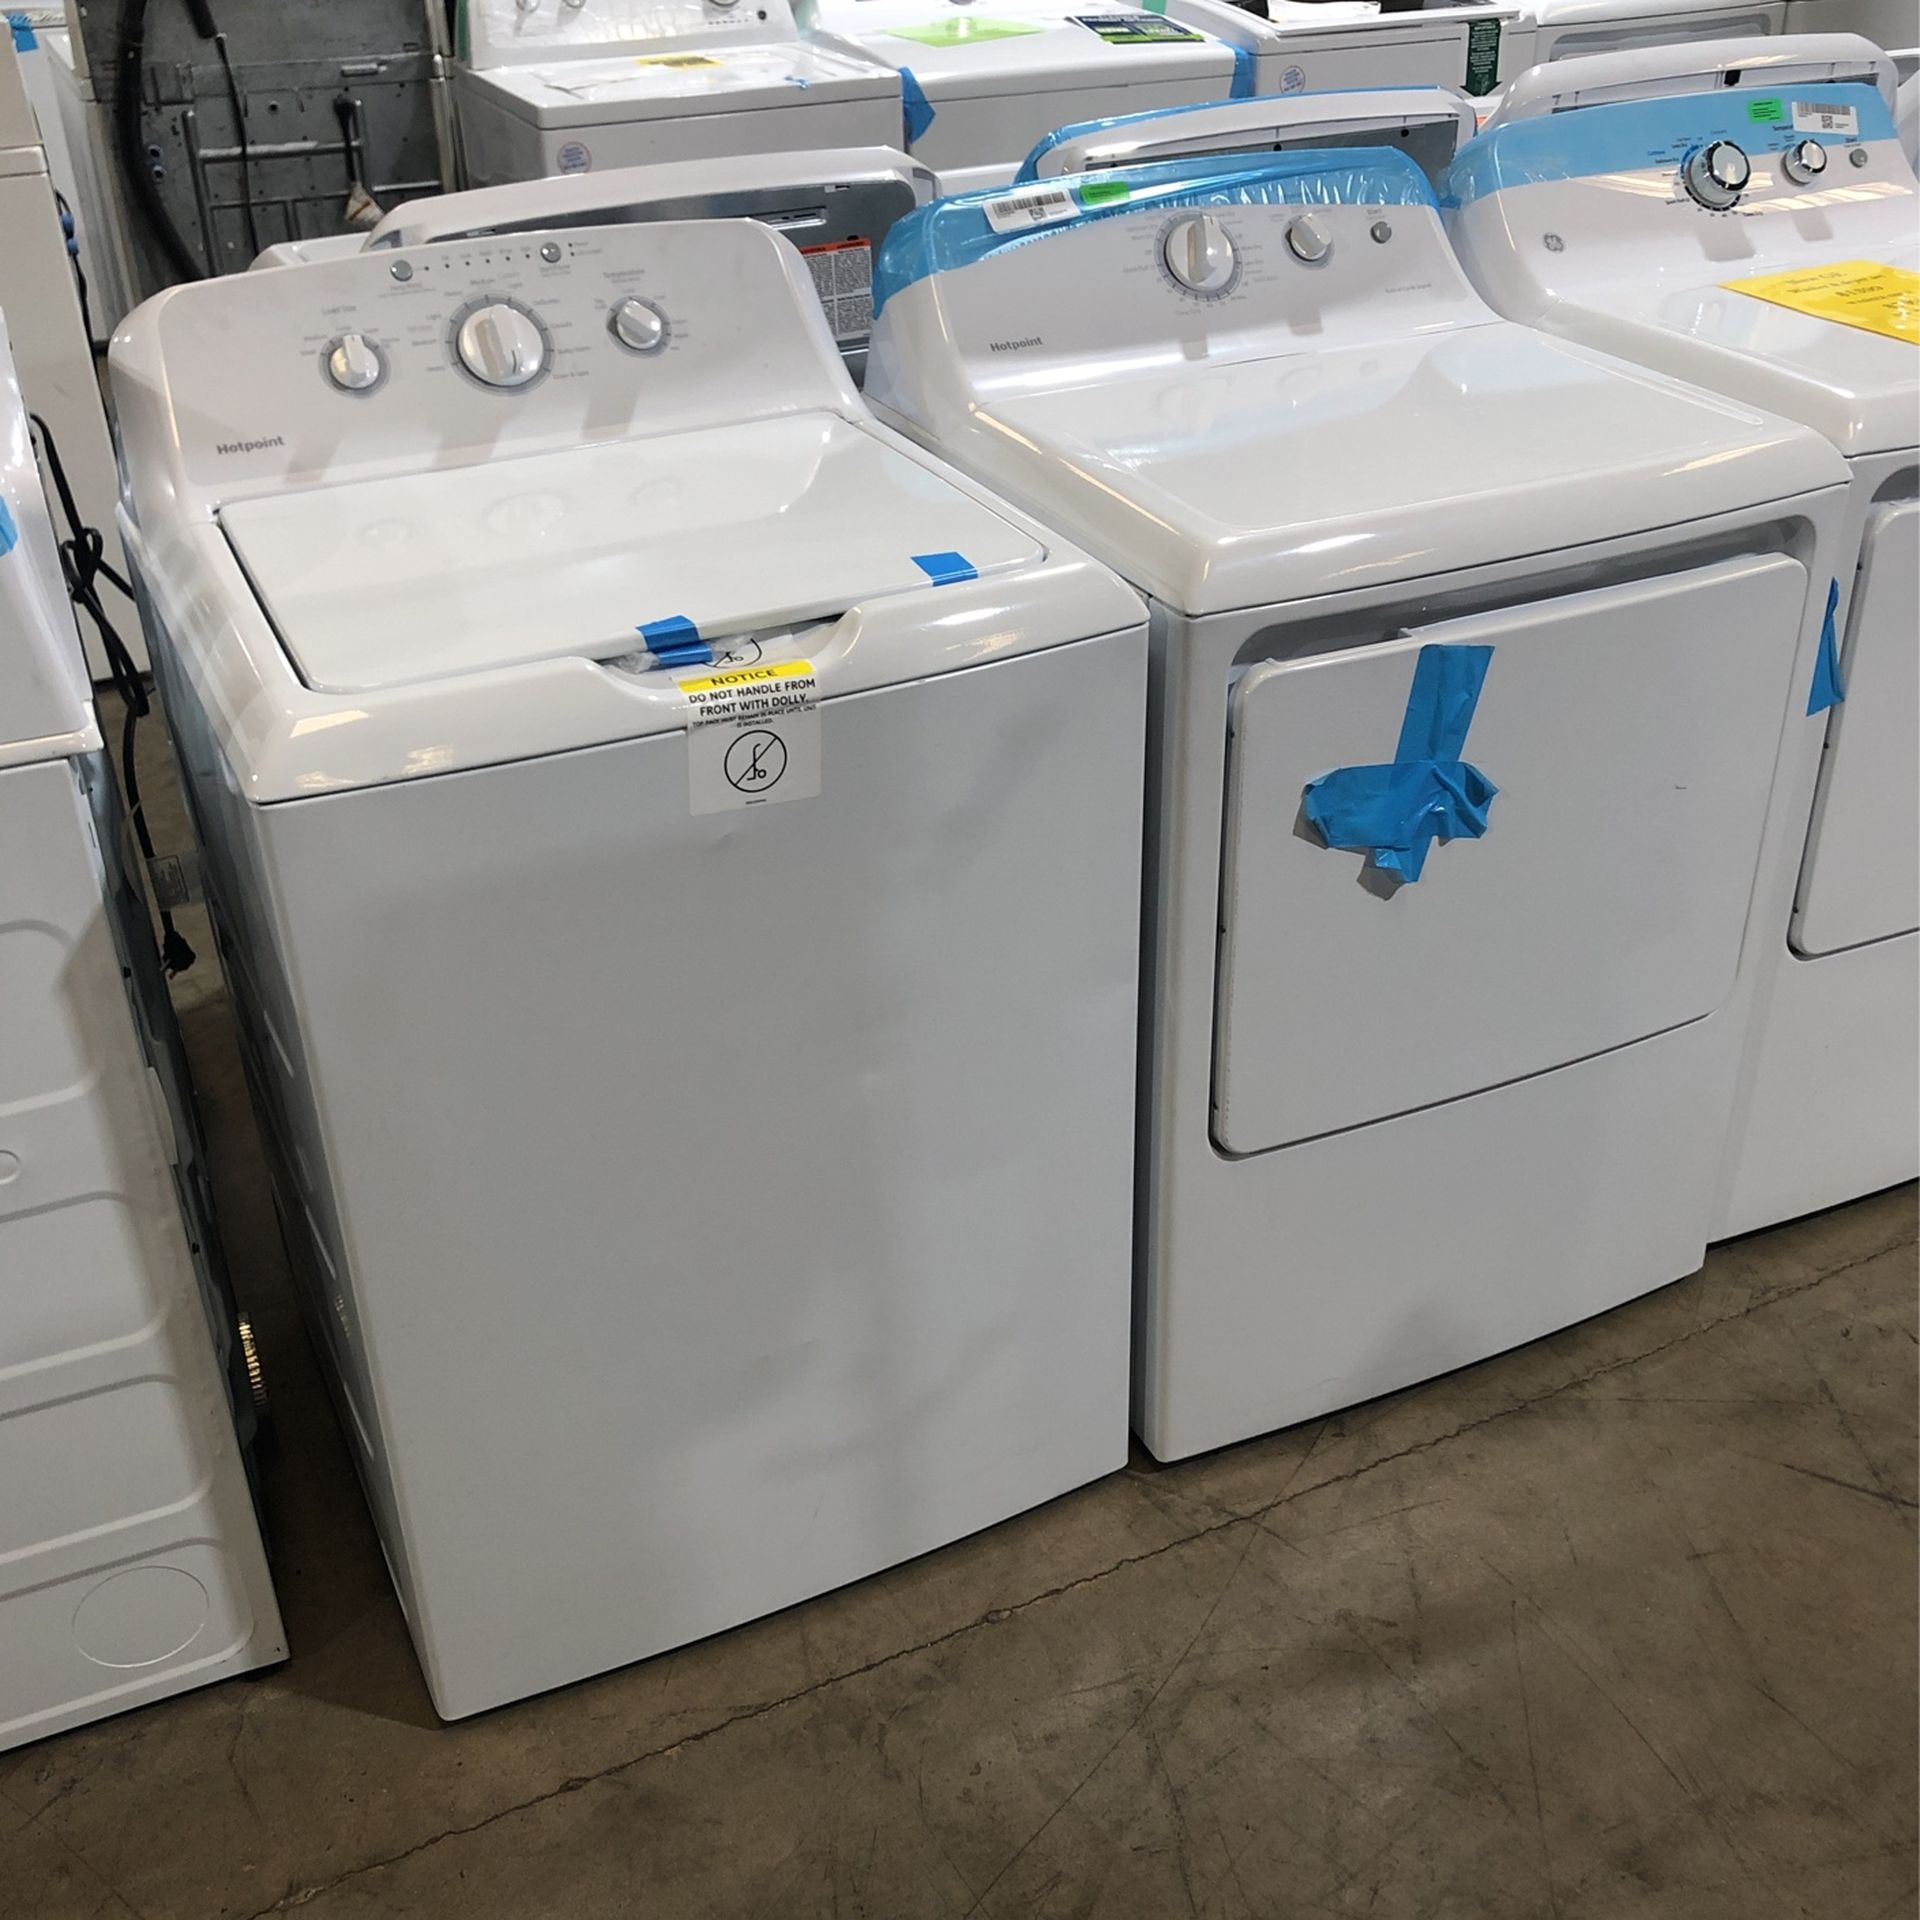 New Hot point Washer And Dryer Set 